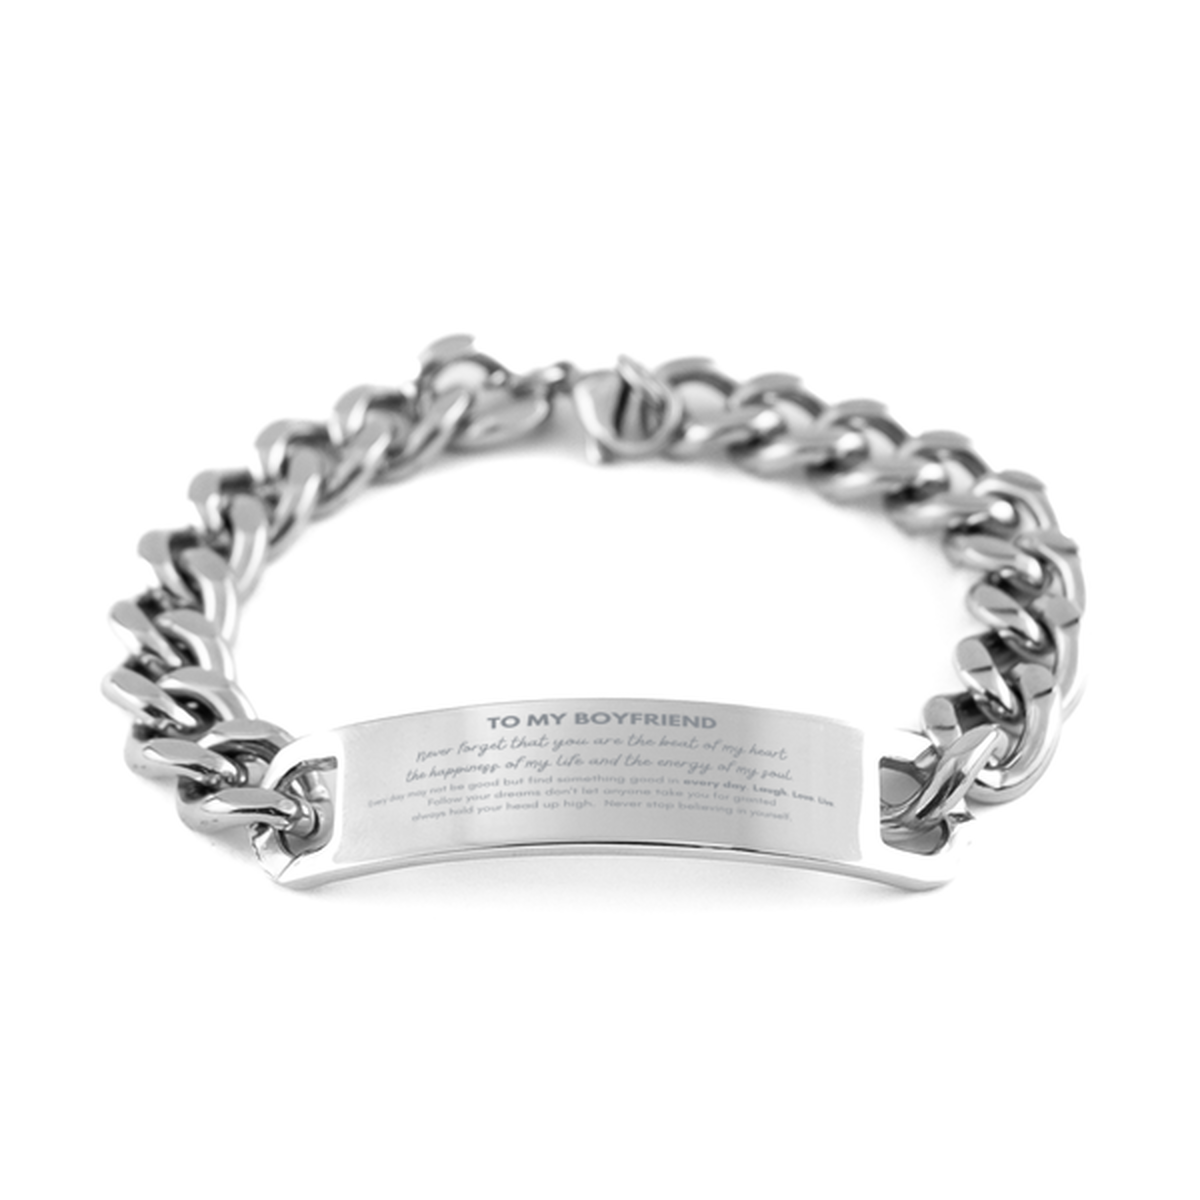 To My Boyfriend Bracelet Gifts, Christmas Boyfriend Cuban Chain Stainless Steel Bracelet Present, Birthday Unique Motivational For Boyfriend, To My Boyfriend Never forget that you are the beat of my heart the happiness of my life and the energy of my soul